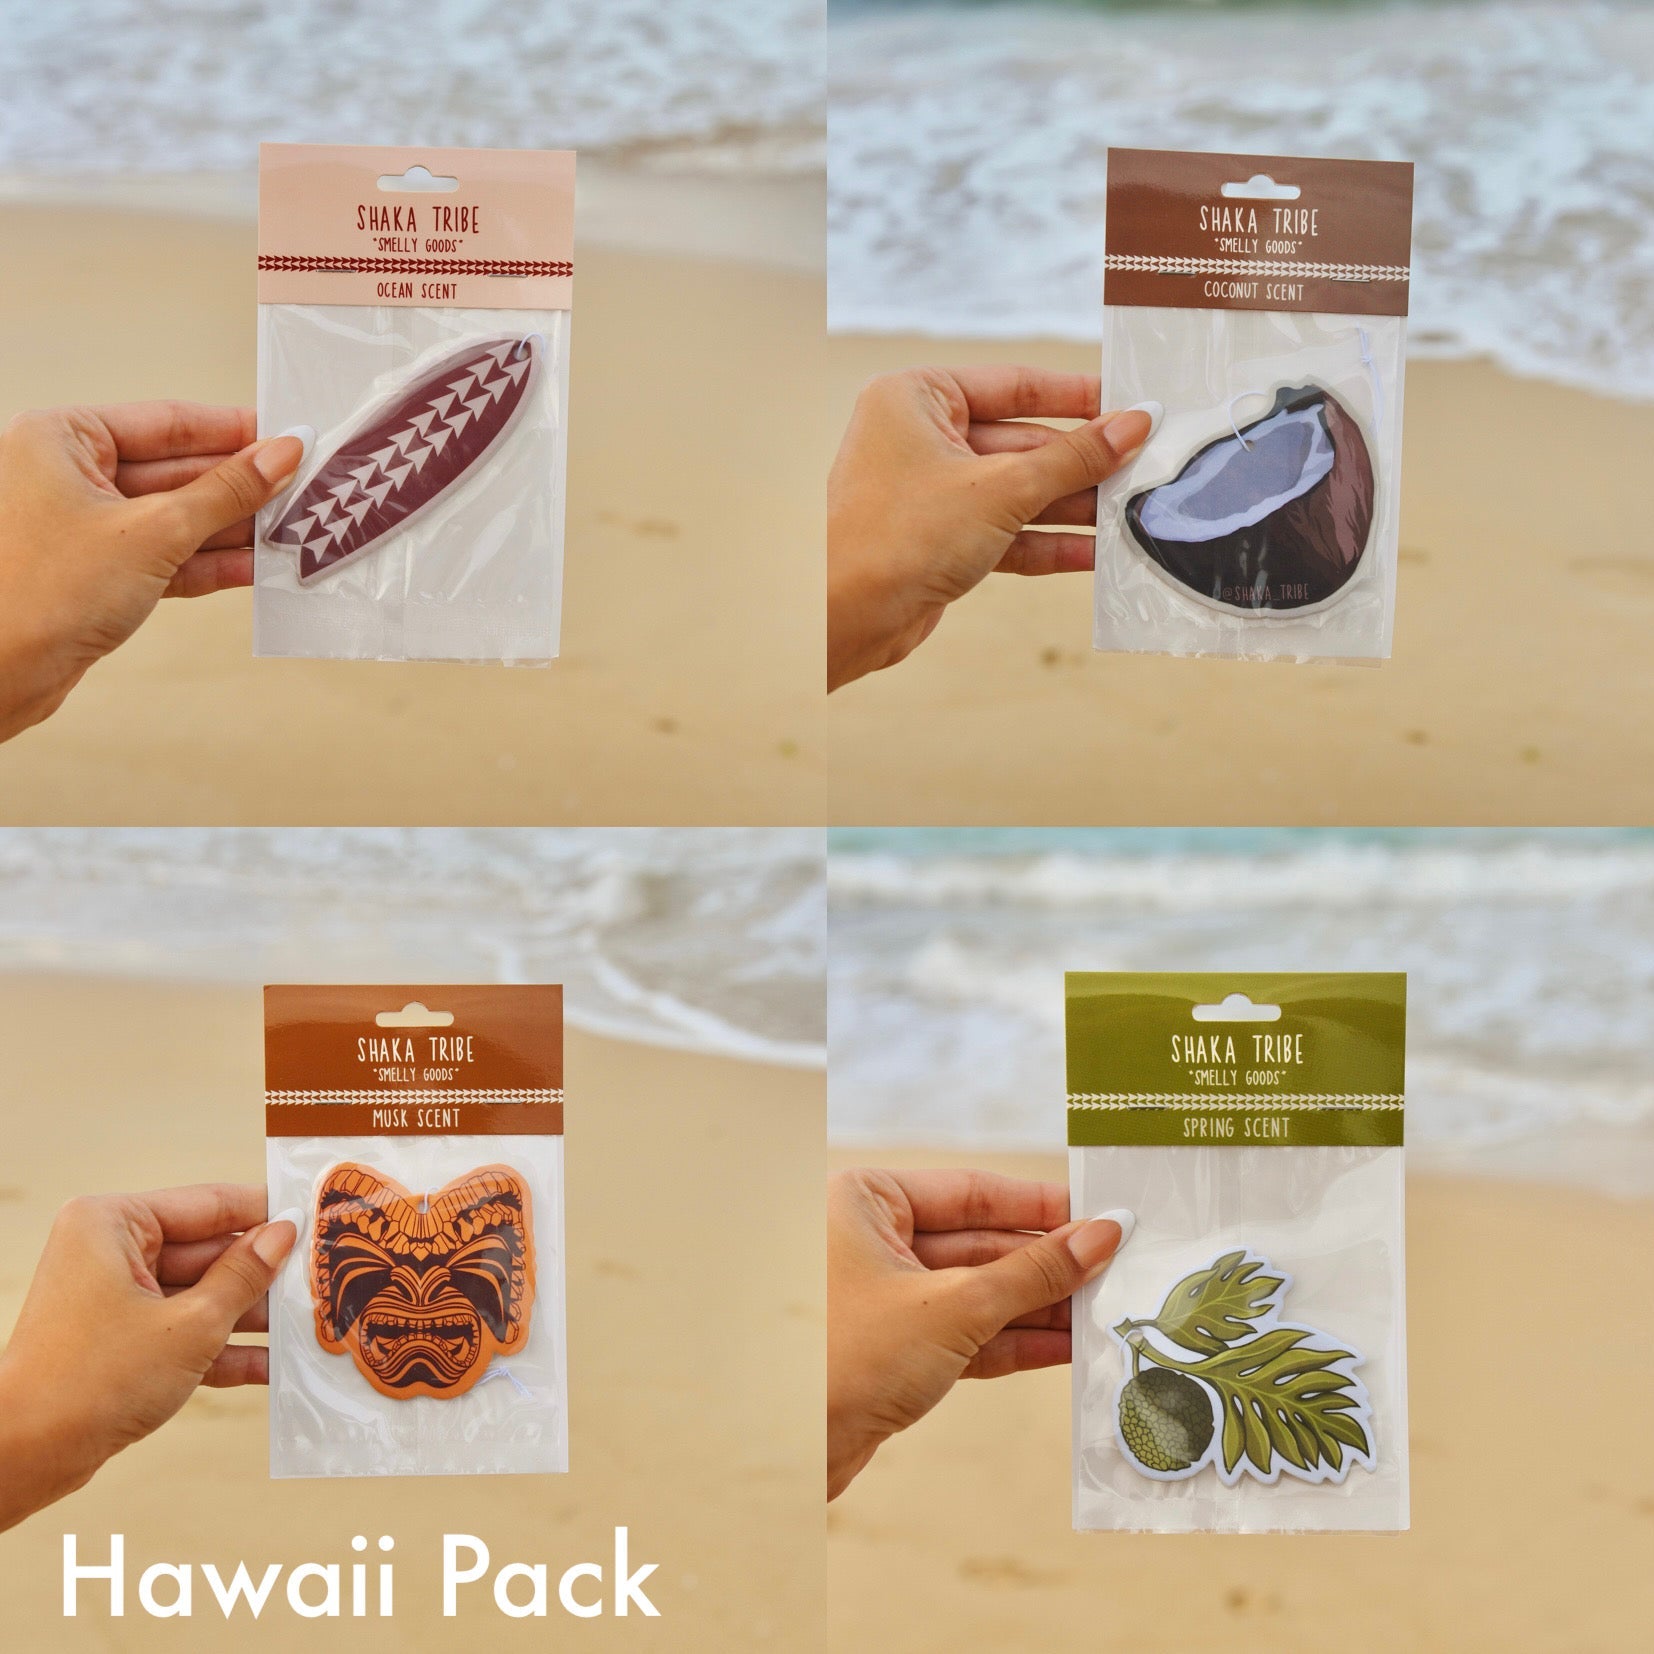 Hawaii Pack- "Smelly Goods" | Car Fresheners